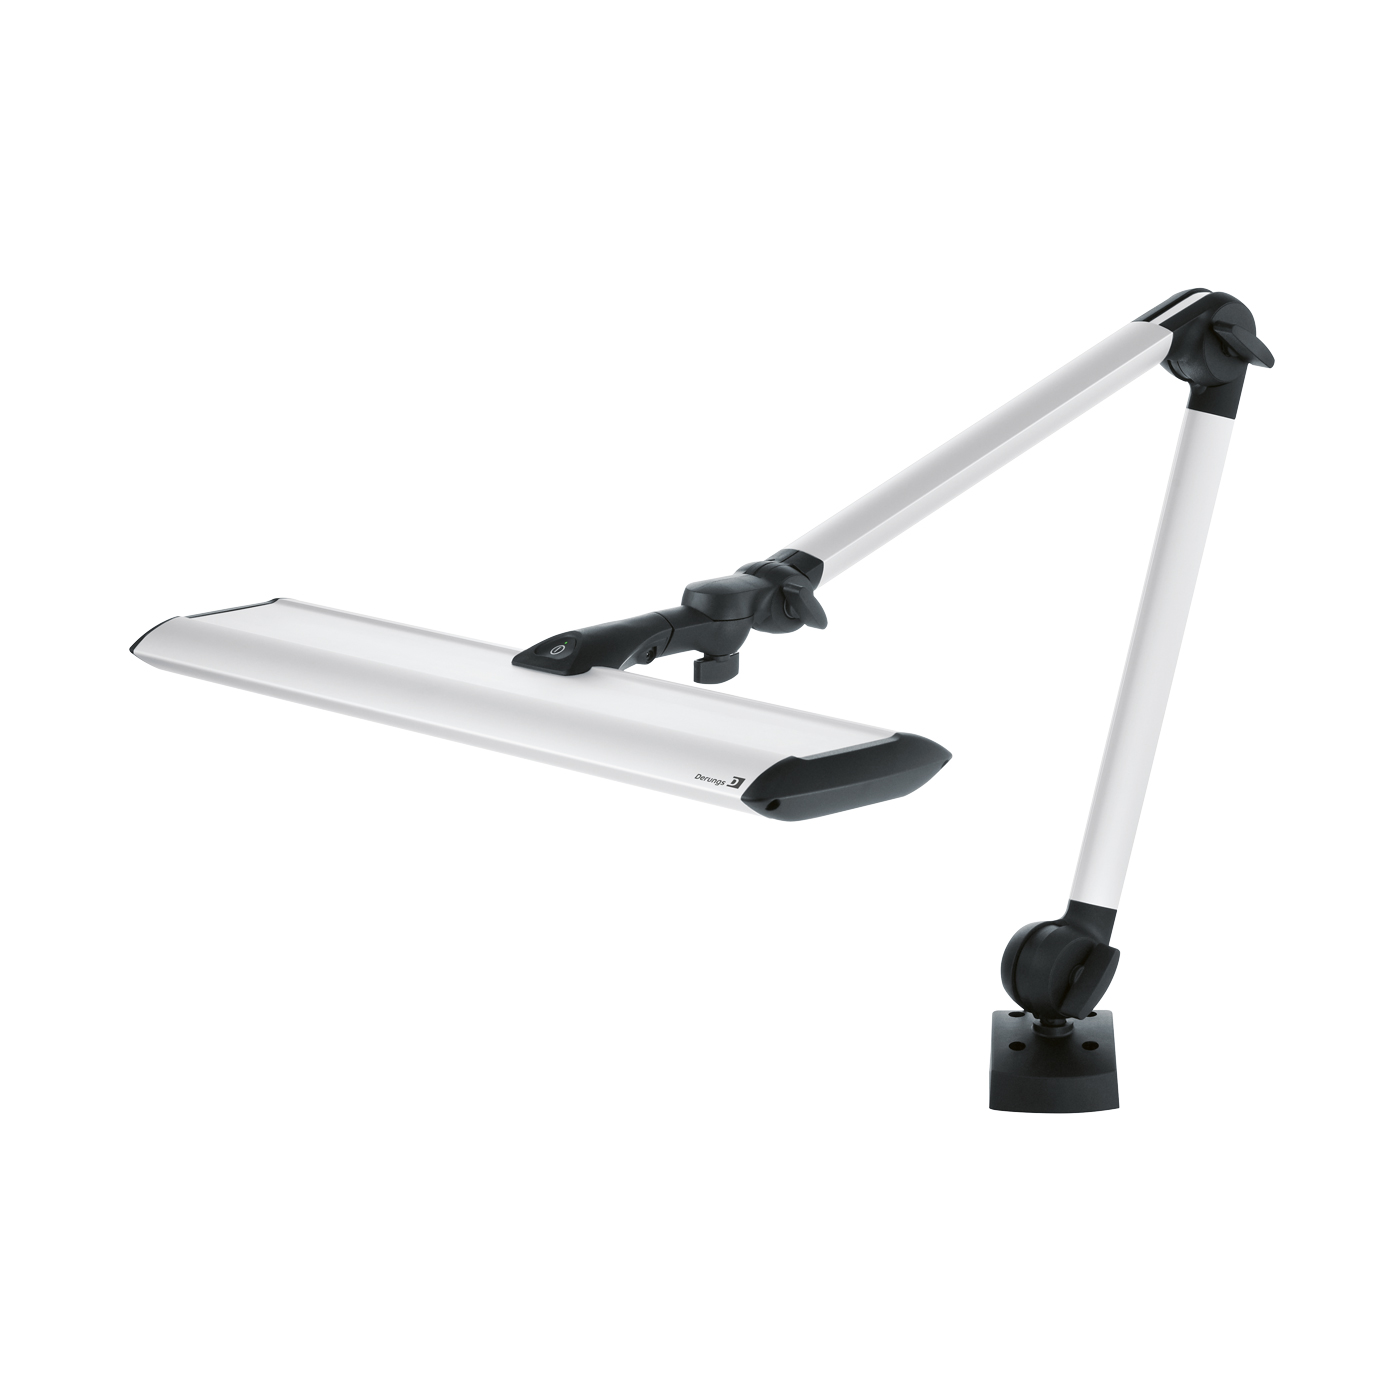 Taneo Lab 30-Tunable White LED bench light - 1 piece